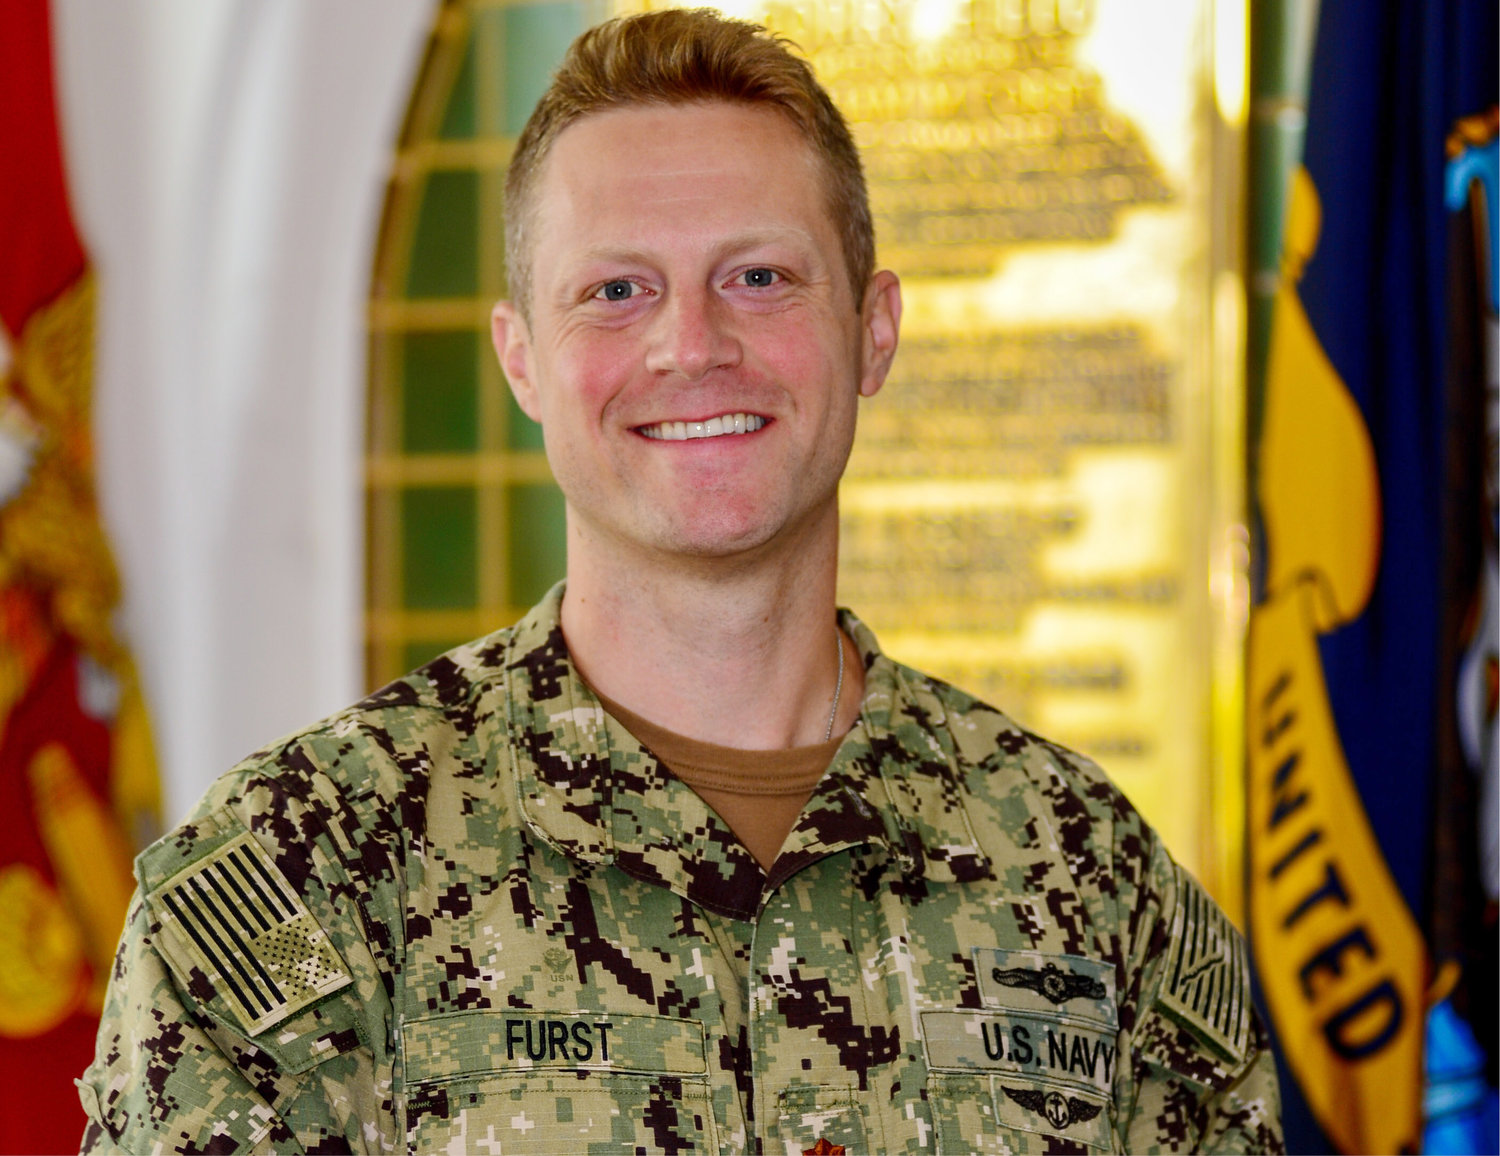 Lt. Cmdr. Kevin Furst, a native of Cookeville, Tennessee